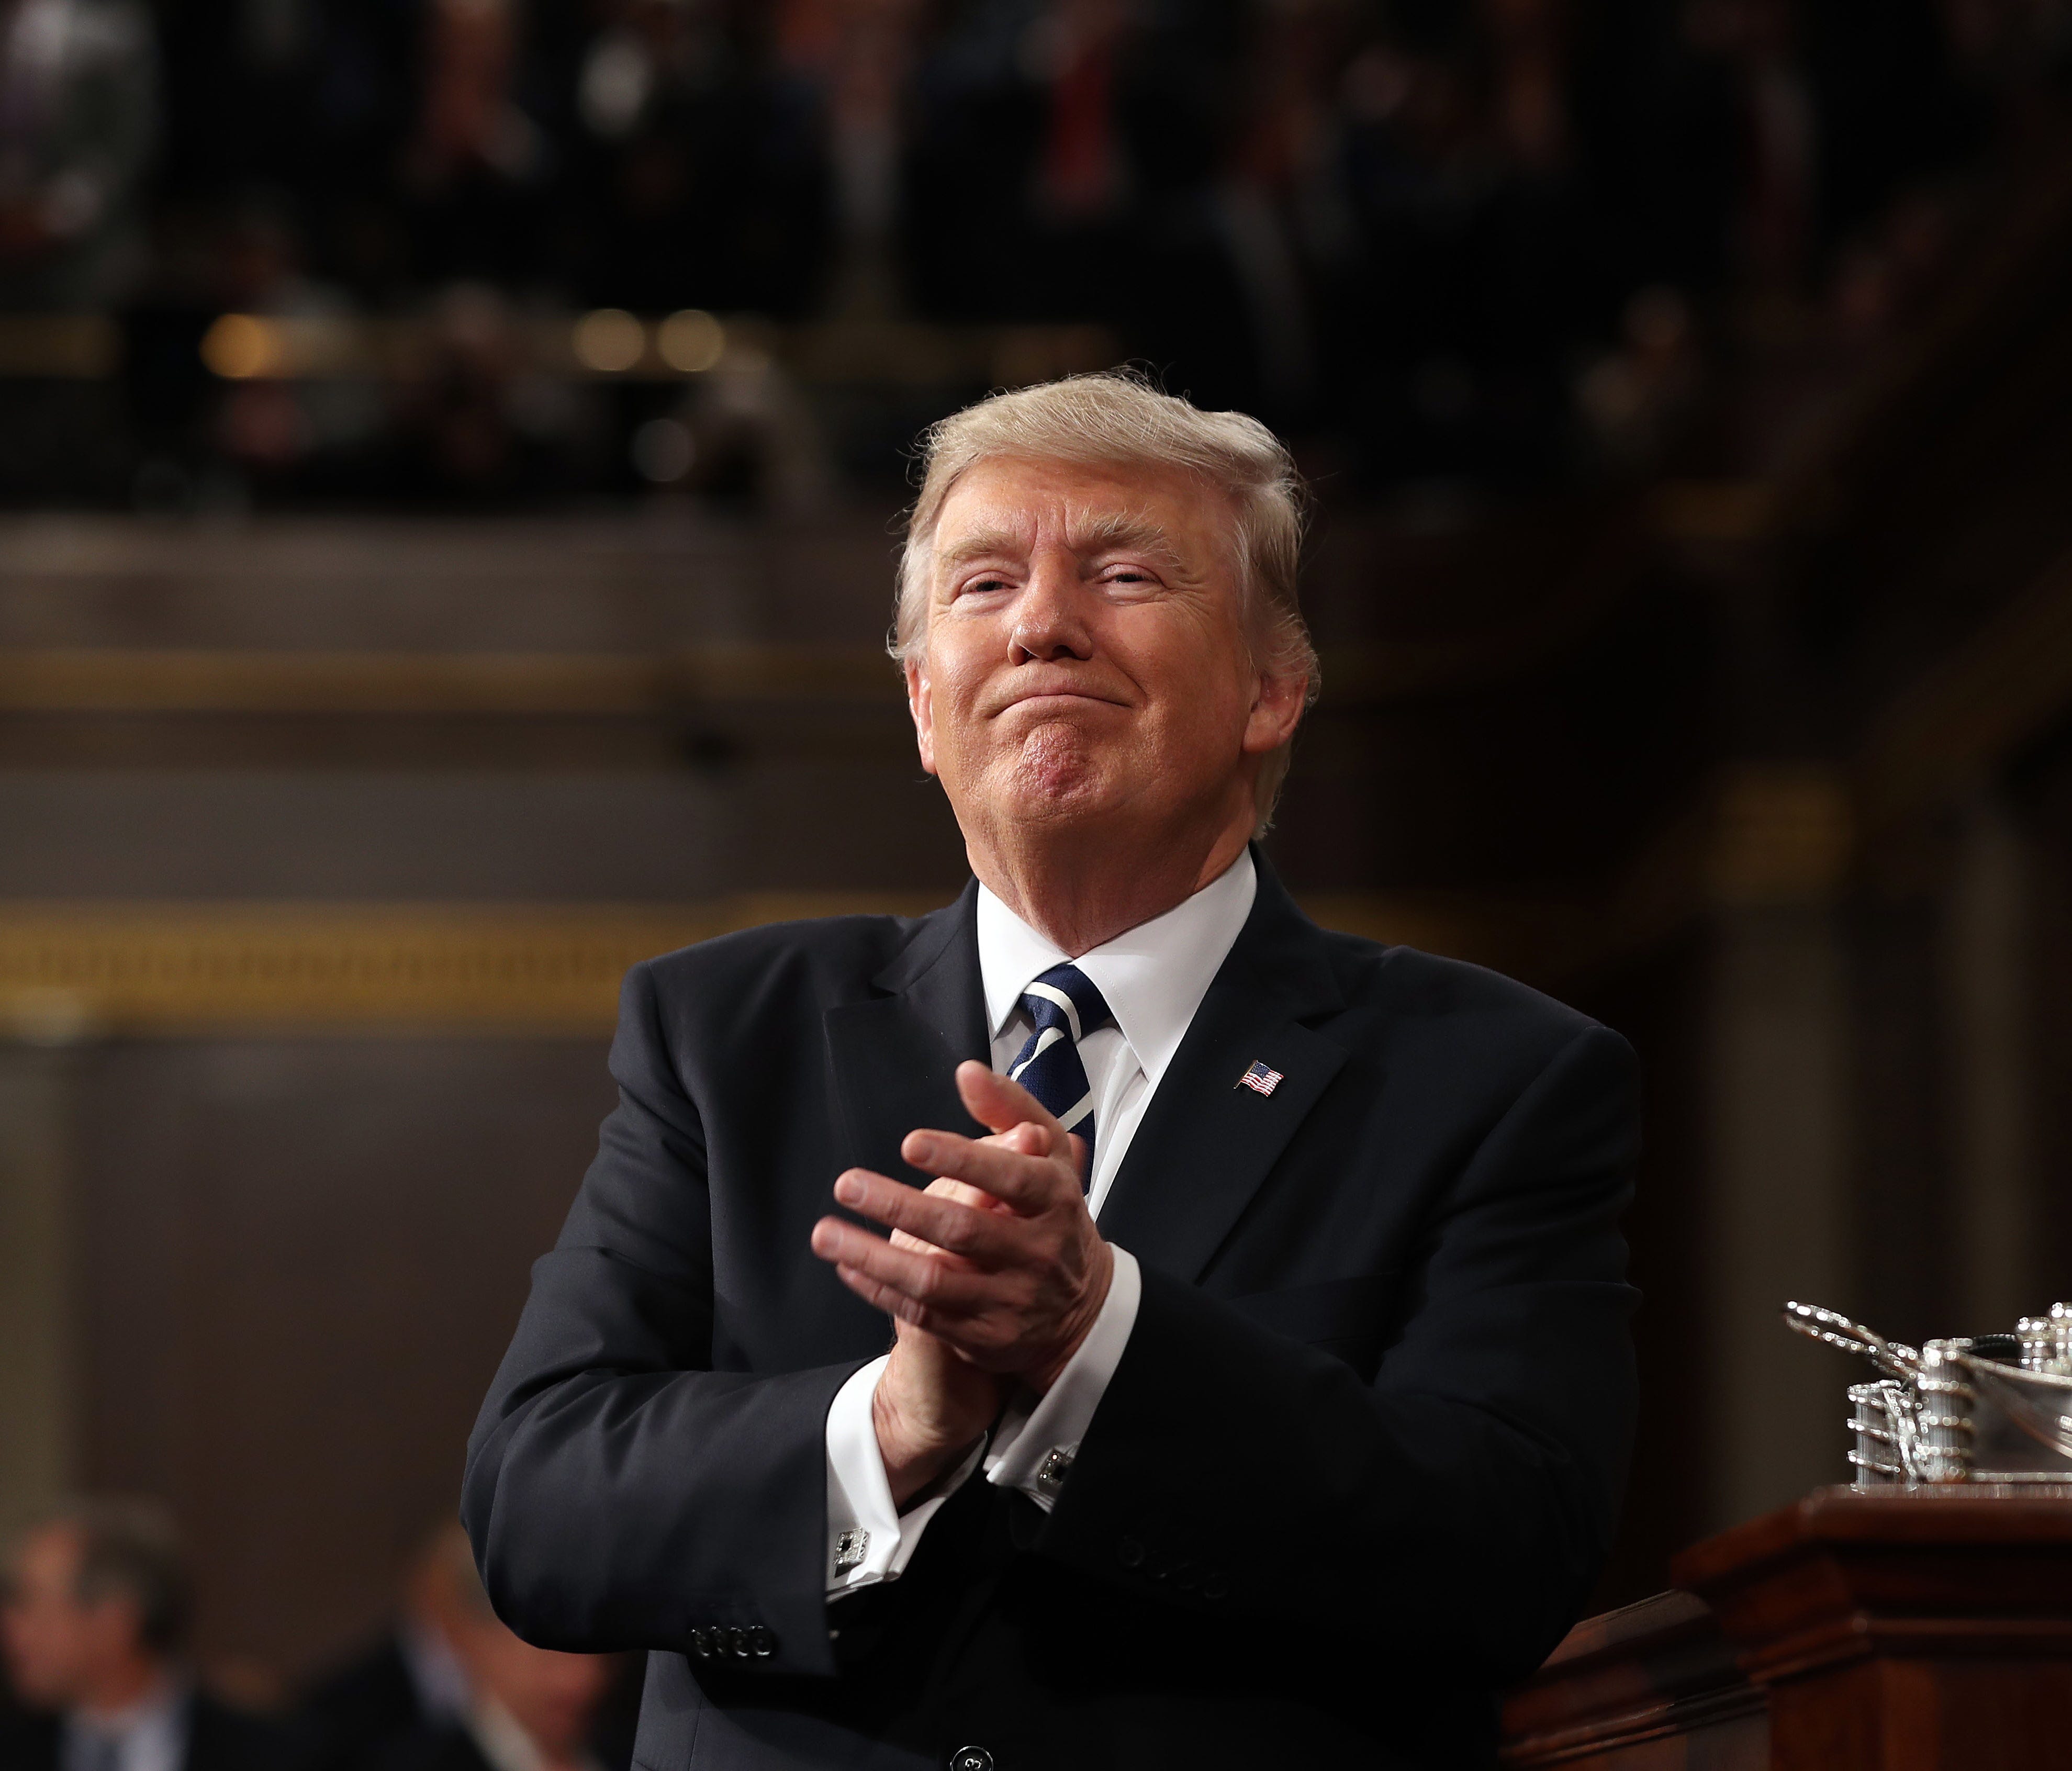 President Trump reacts after addressing a joint session of Congress at the U.S. Capitol on Feb. 28, 2017.